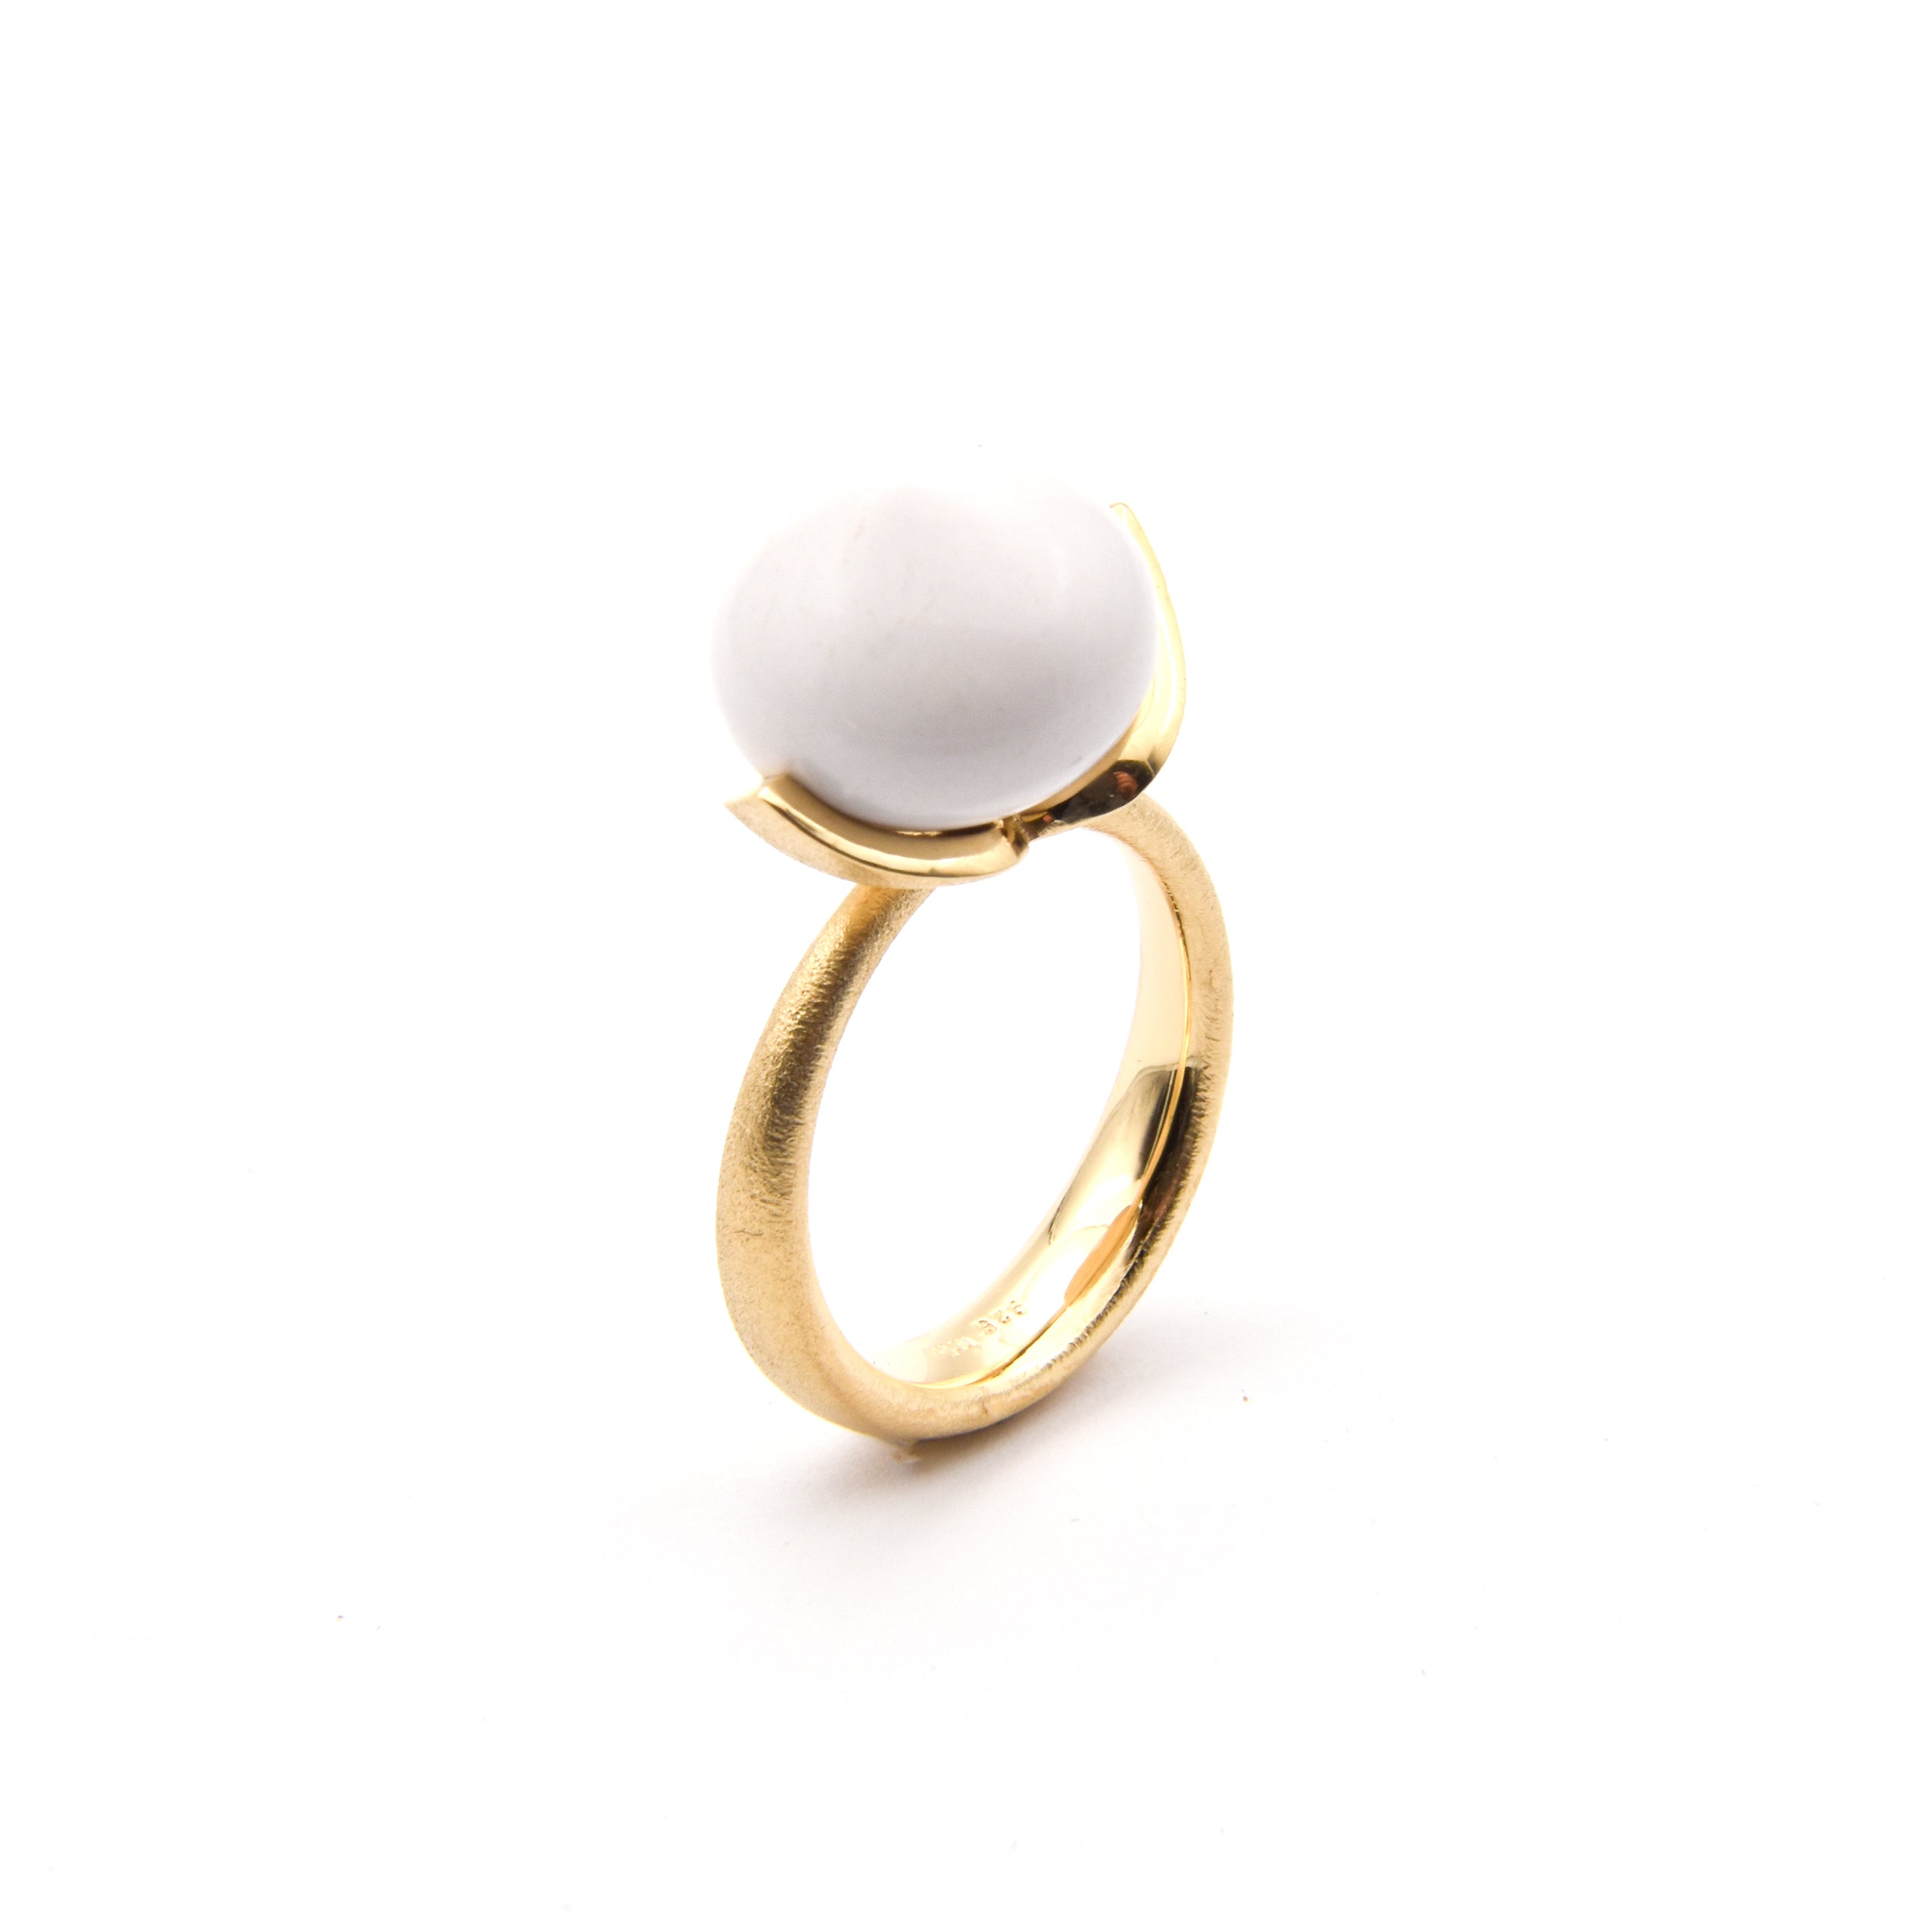 Dolce ring "big" with Kascholong 925/-